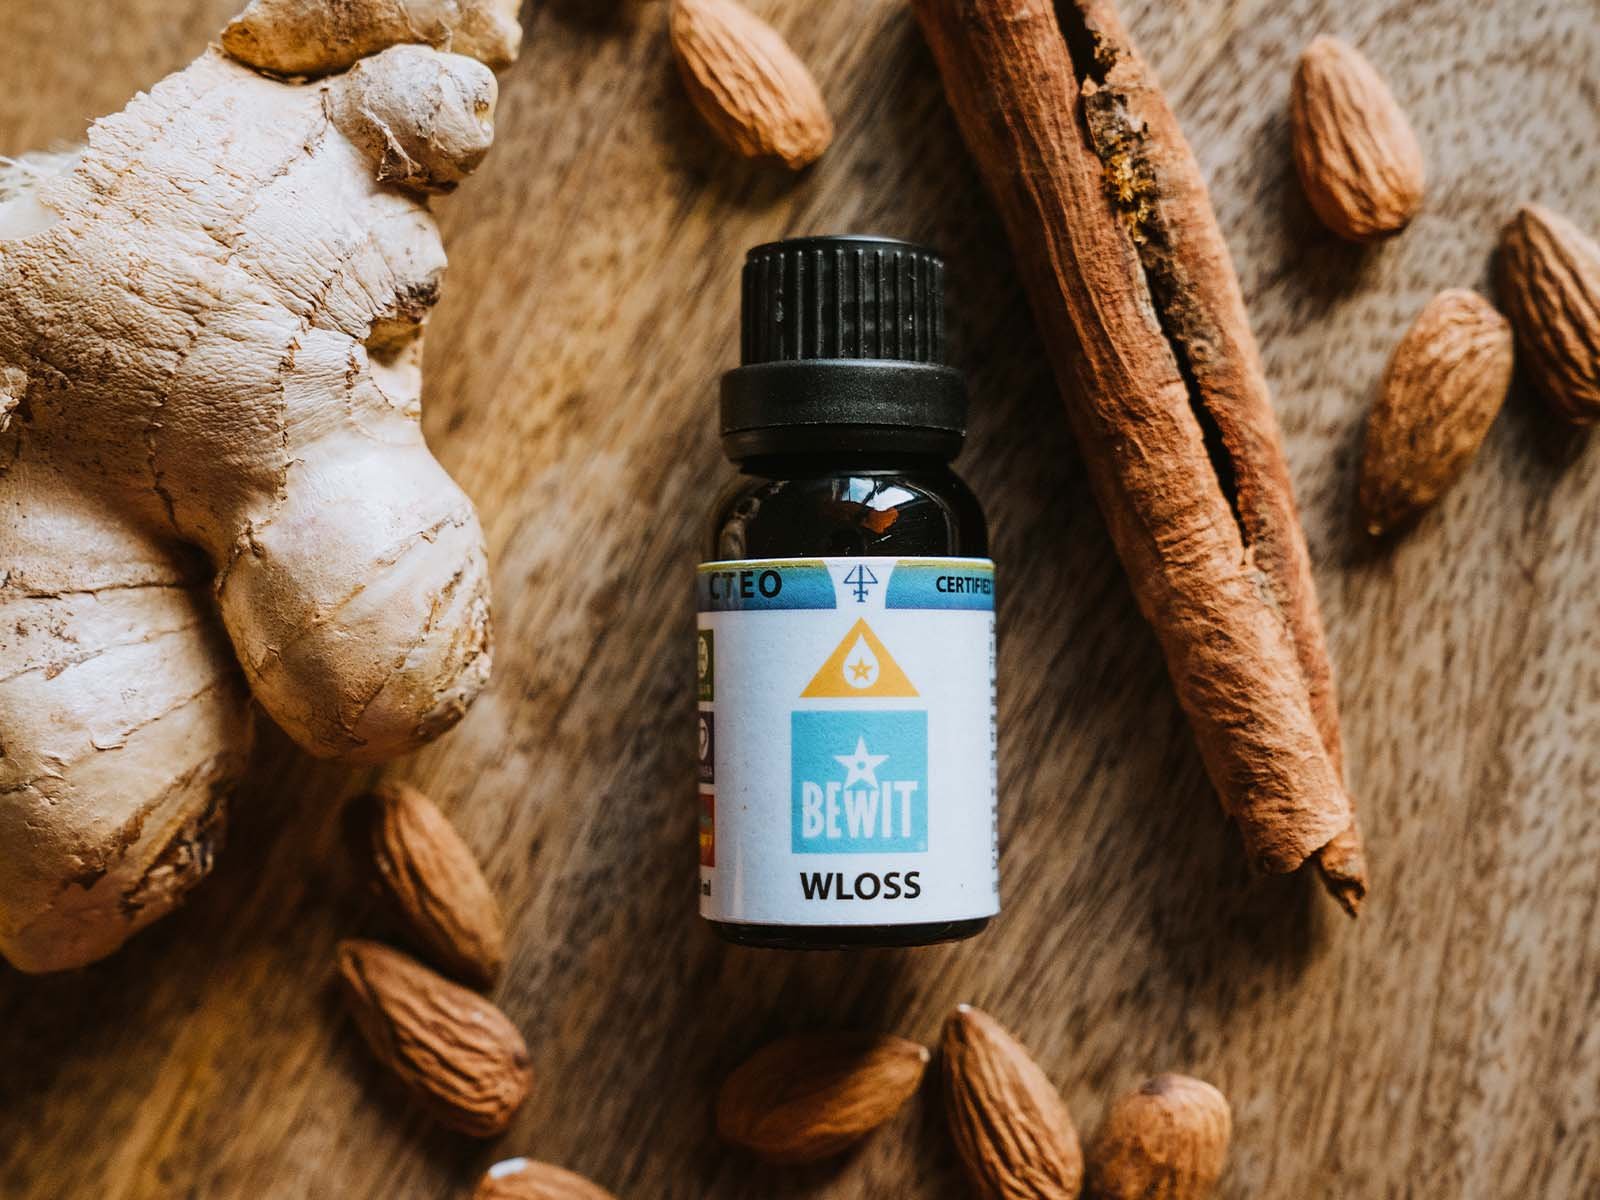 BEWIT WLOSS - A unique blend of the essential oils - 3